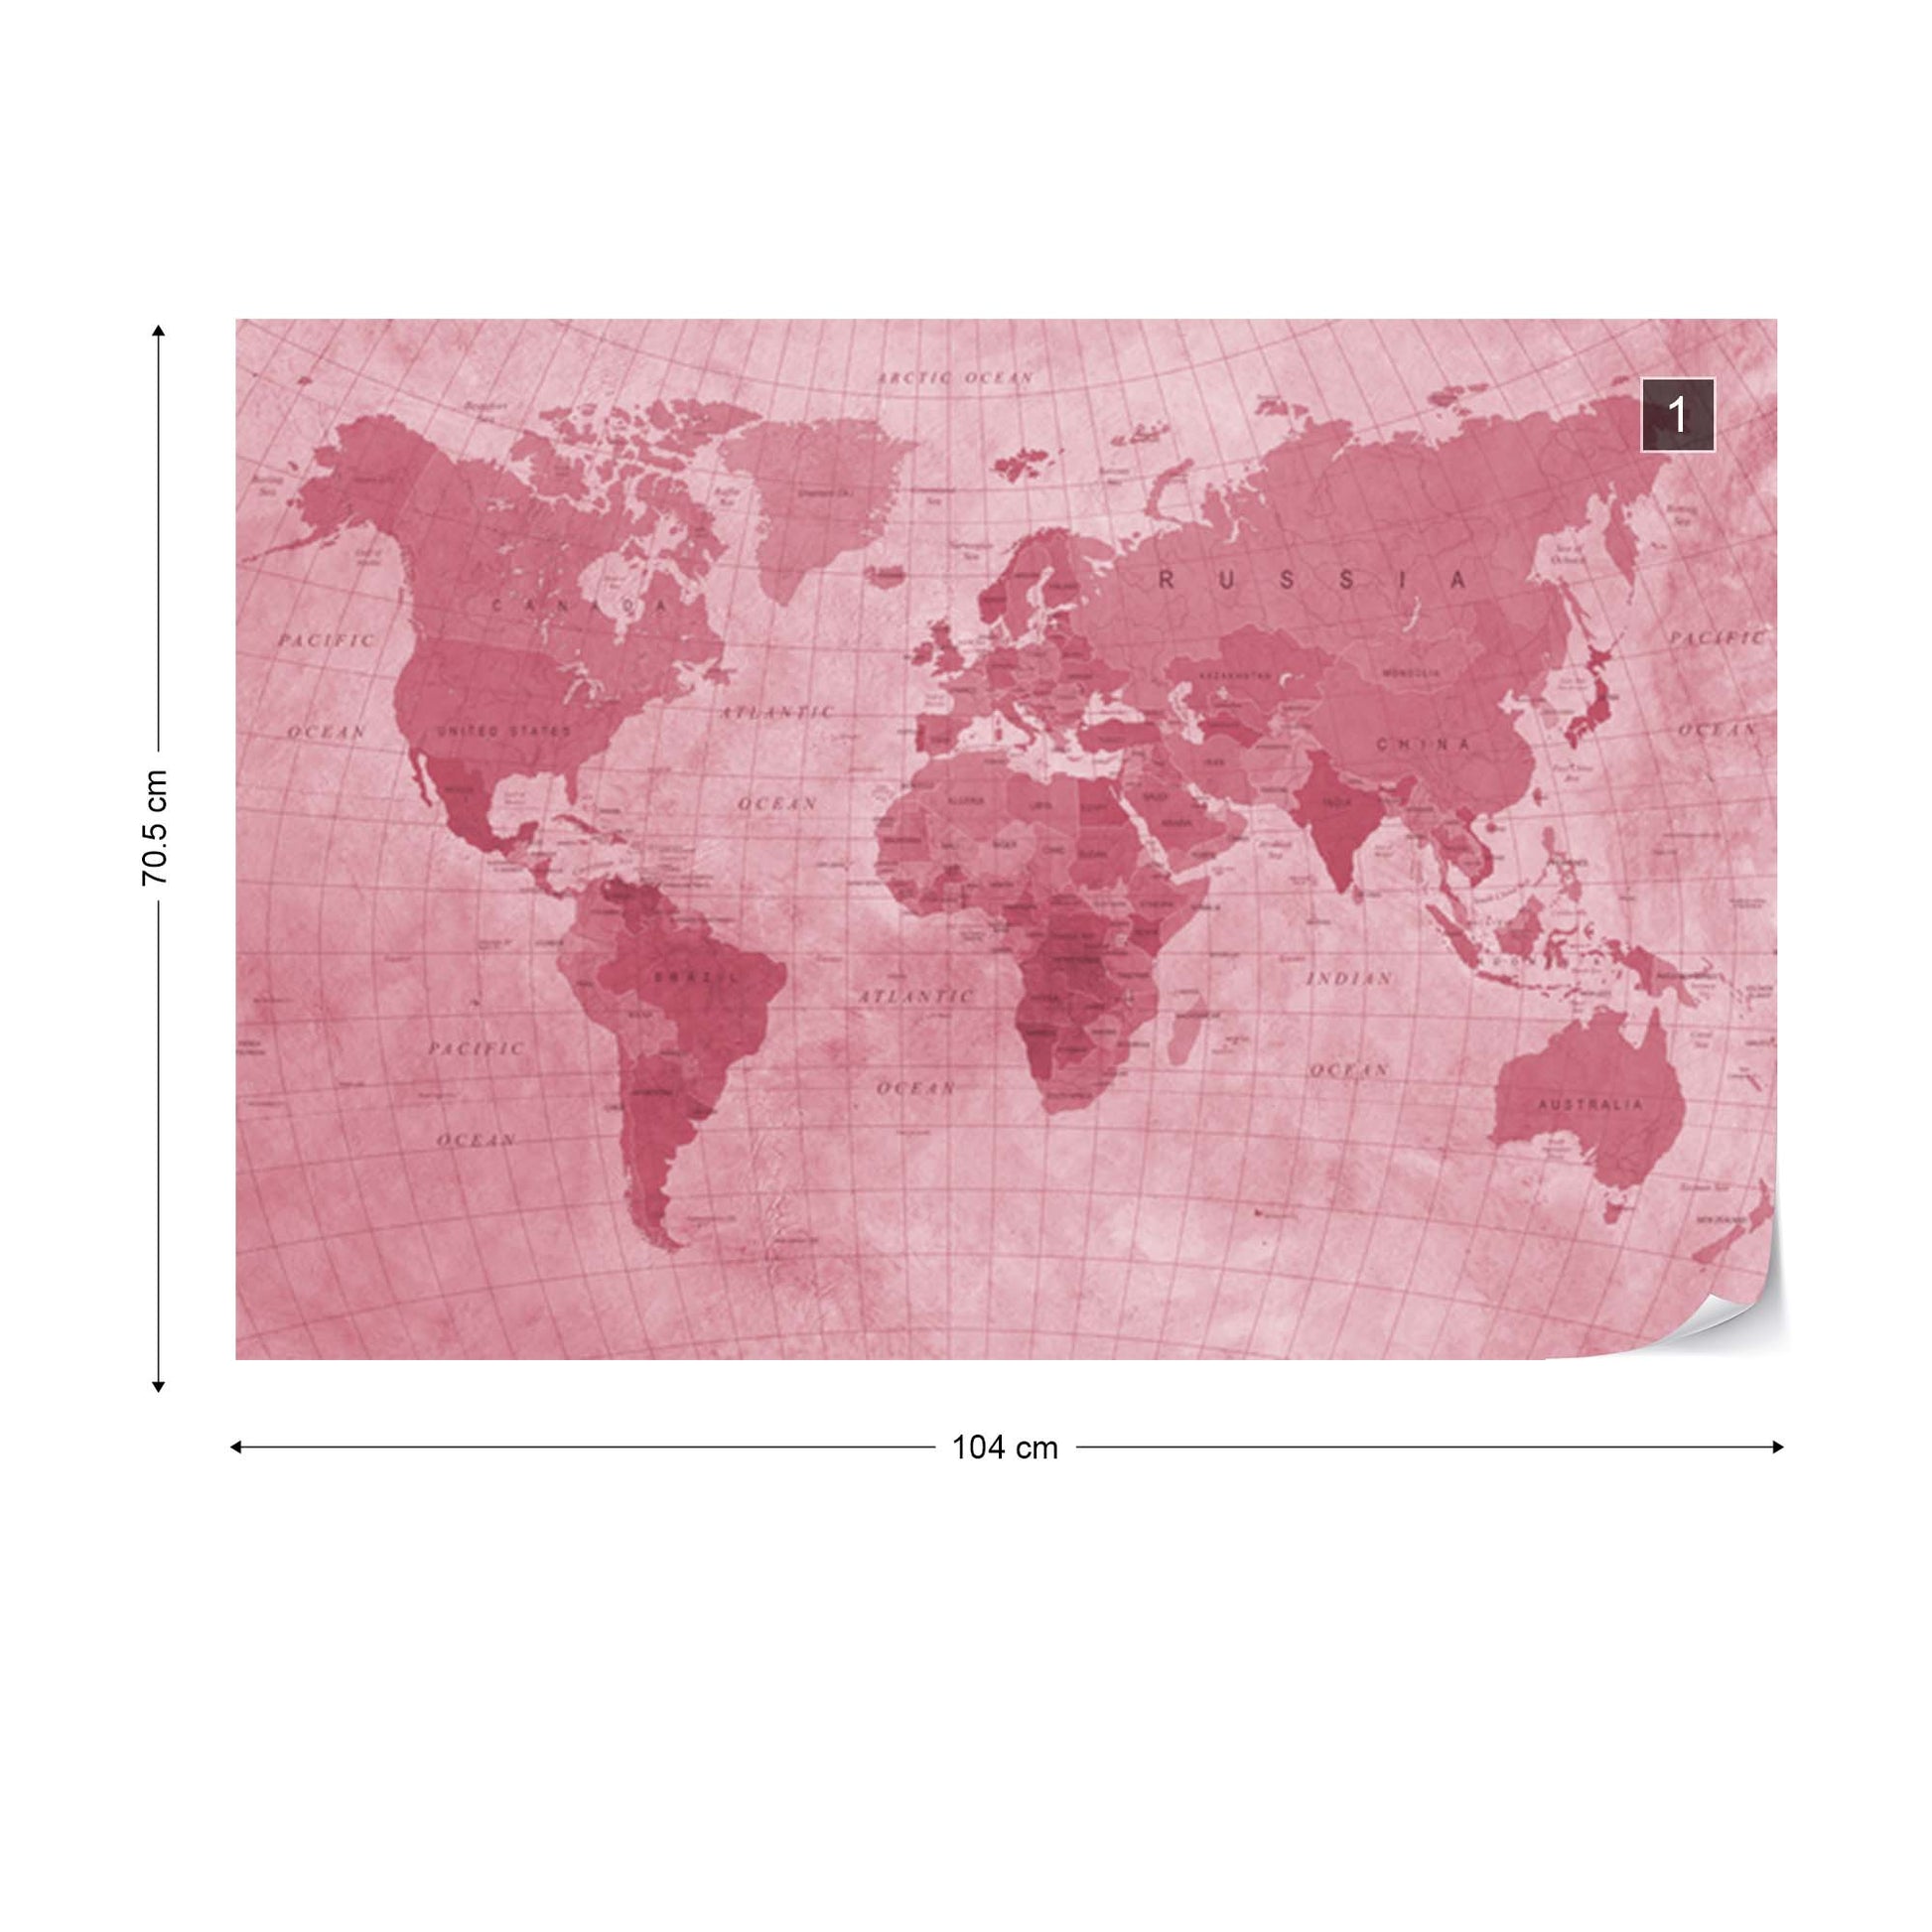 World Map Textured Red Wallpaper Waterproof for Rooms Bathroom Kitchen - USTAD HOME